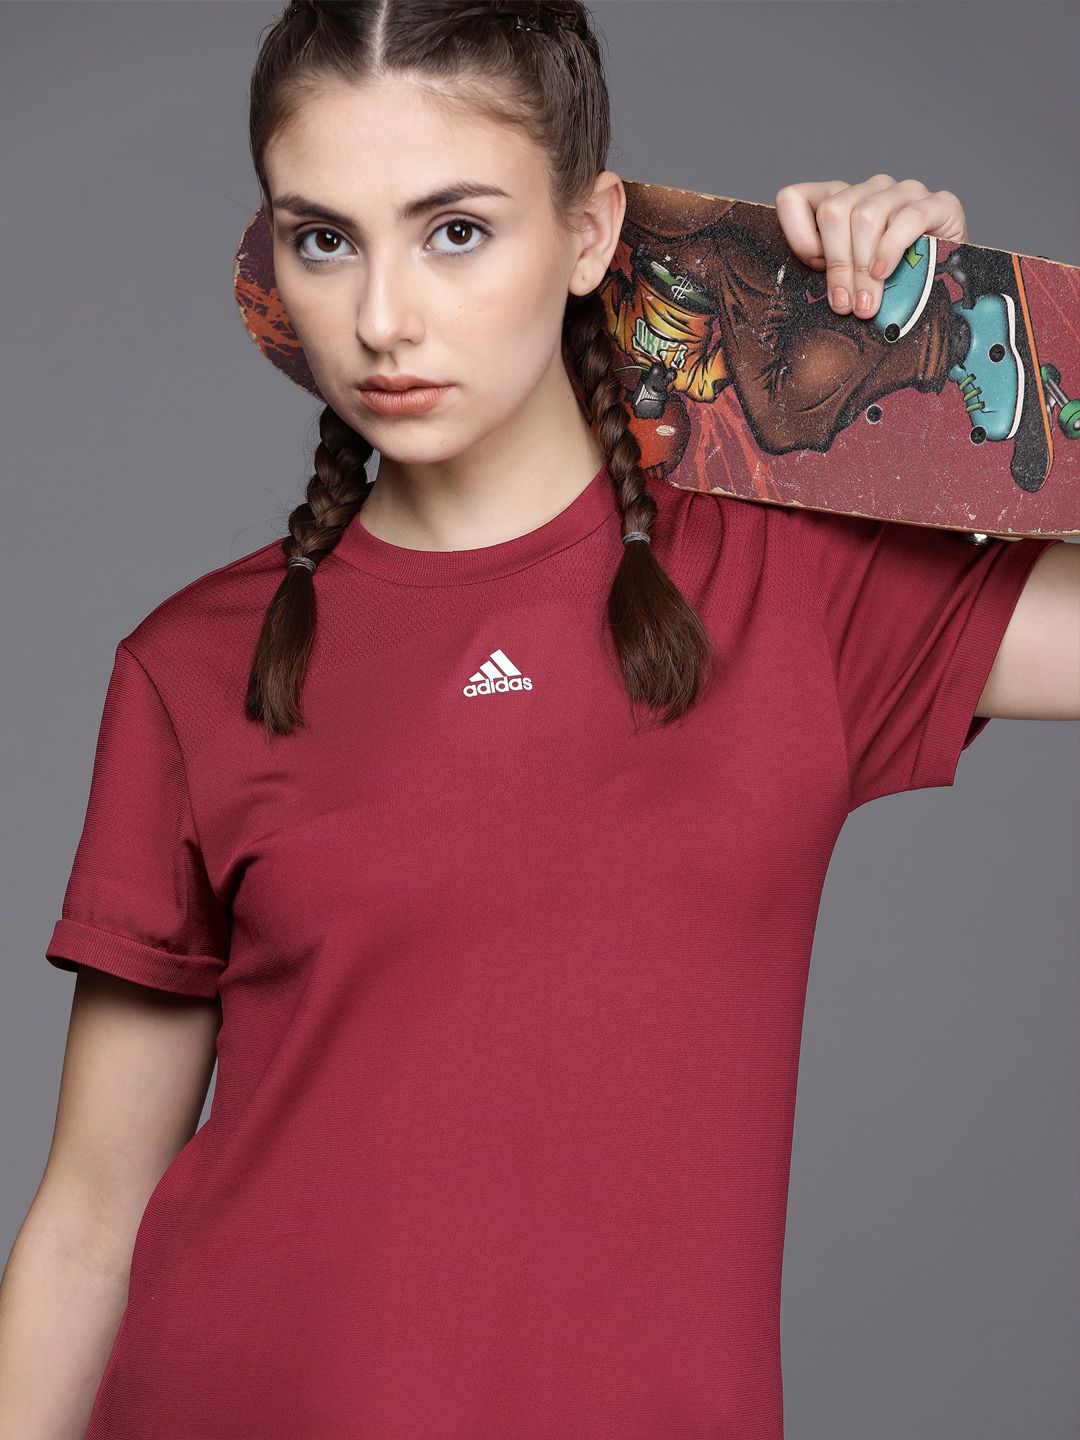 ADIDAS Women Burgundy Training or Gym Sustainable T-shirt Price in India